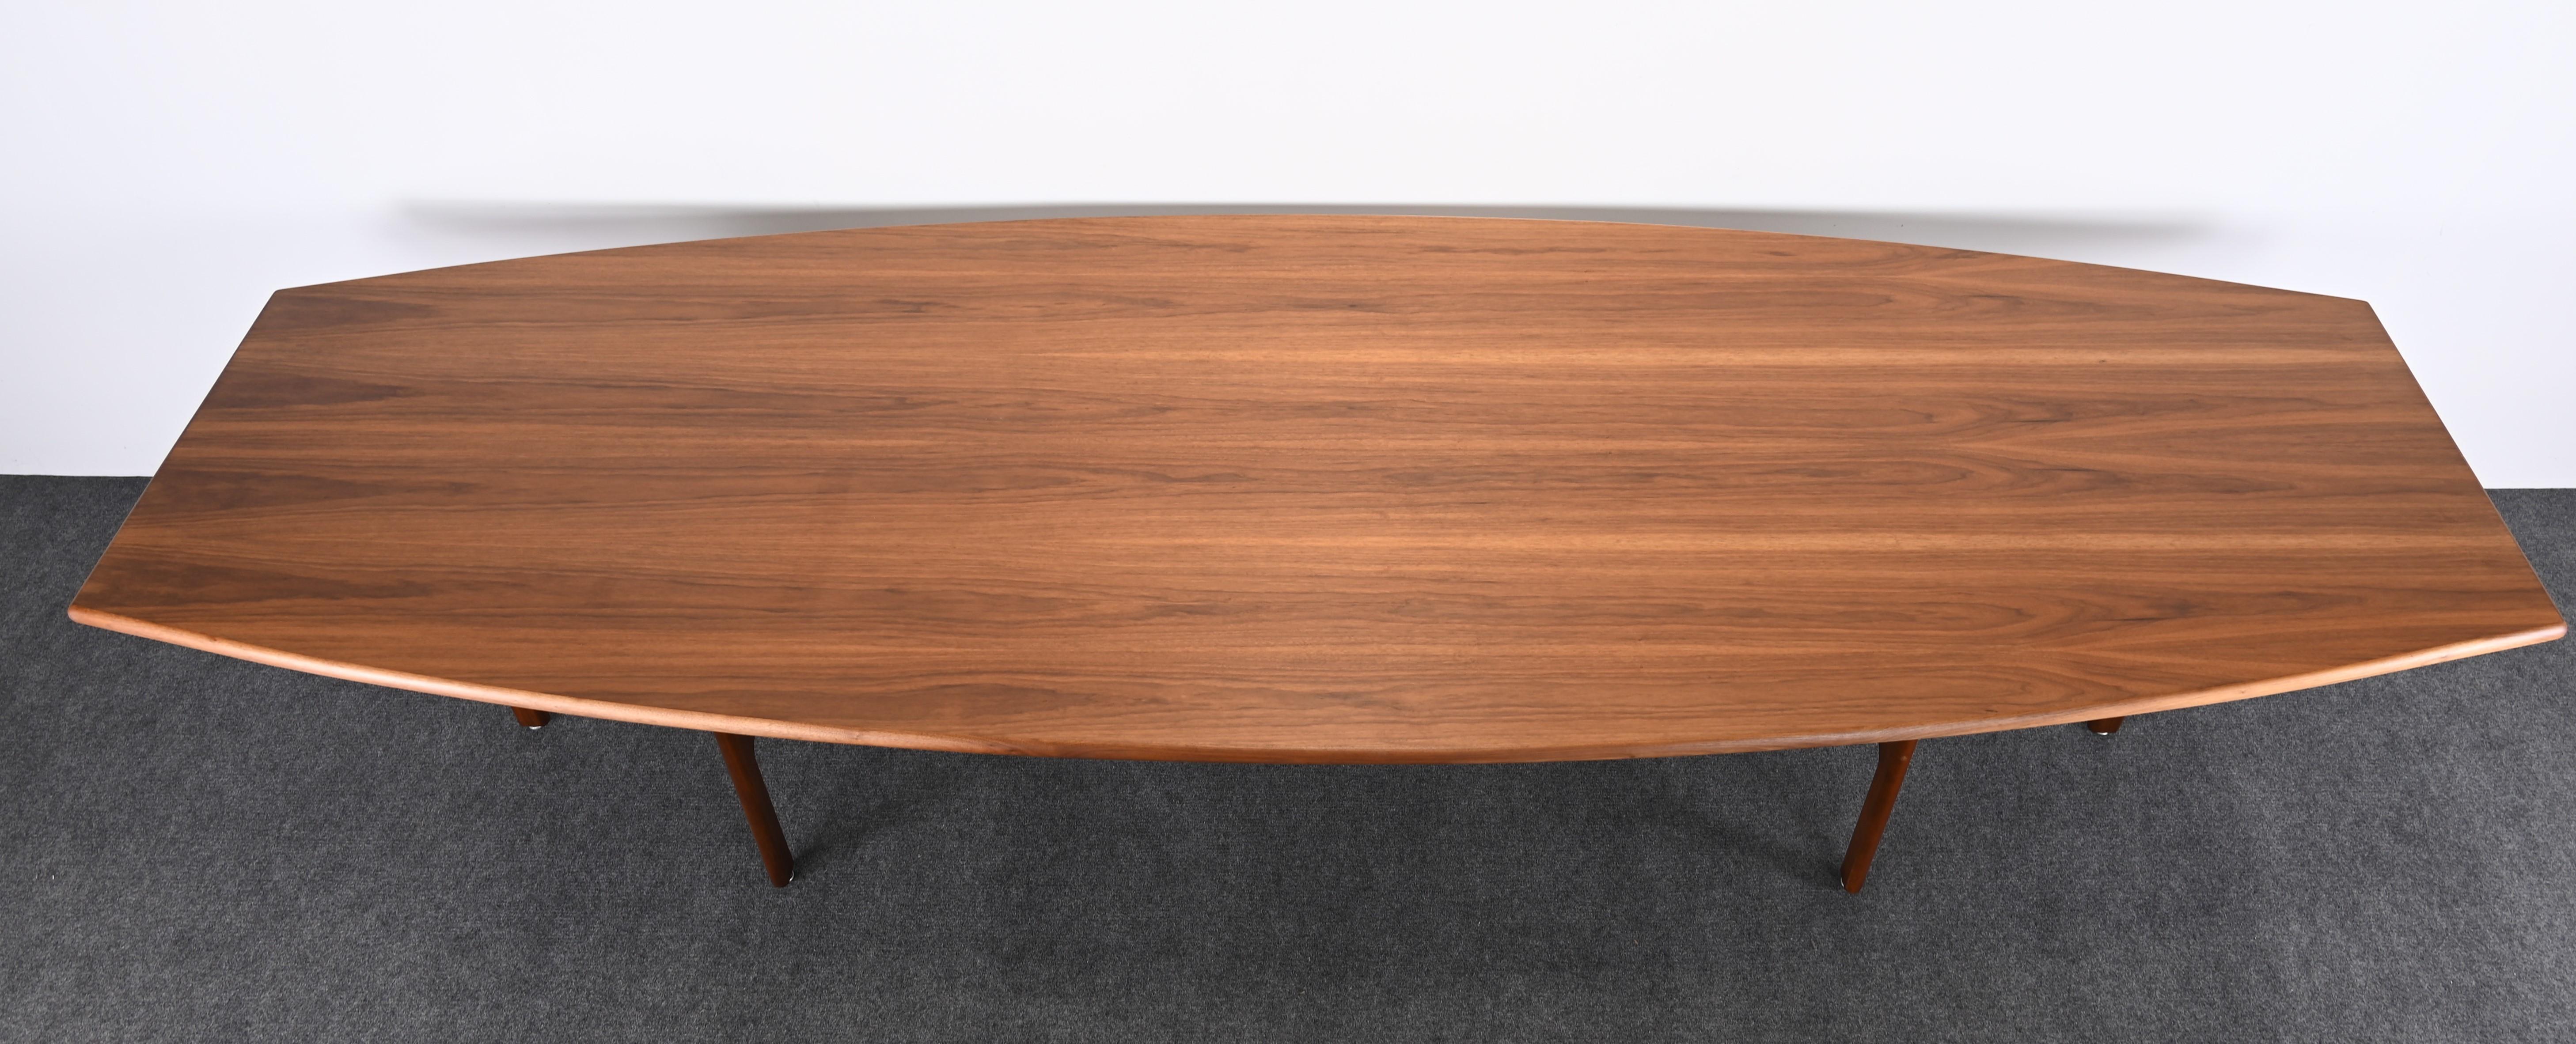 Conference Table or Dining Table by Jens Risom, 1963 9